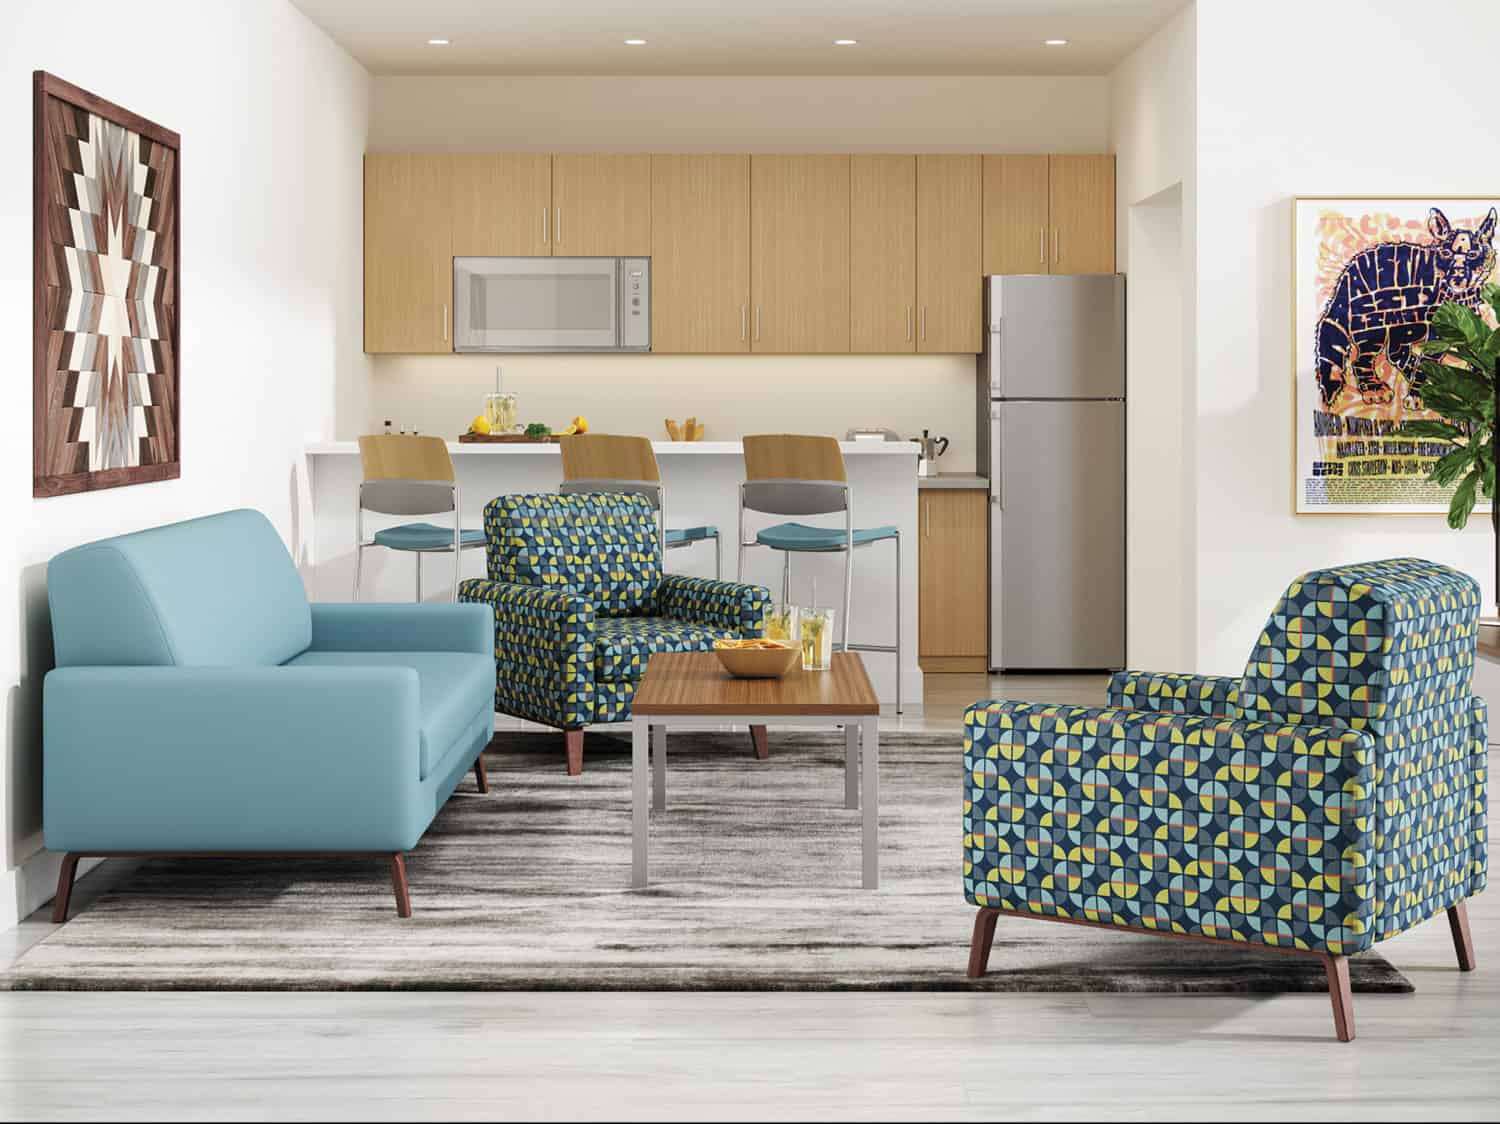 Student Housing Room Featuring Chill Chair and Loveseat, Fuse Coffee Table and Upland Counter Stools